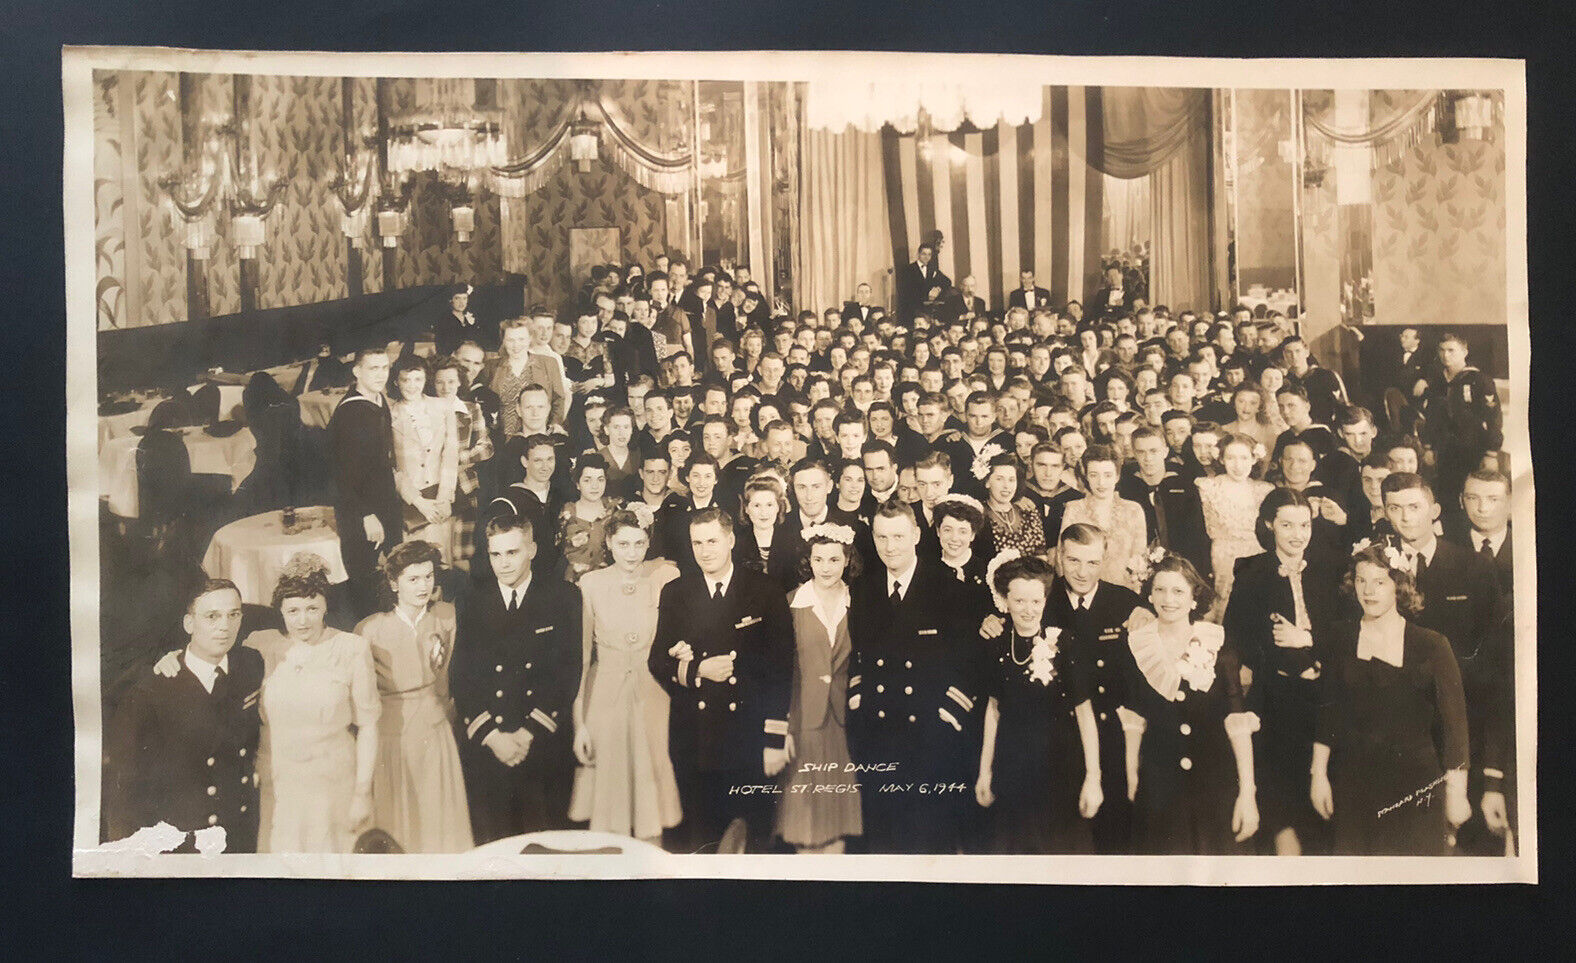 WWII 1944 VINTAGE SHIP DANCE HOTEL ST REGIS NY B&W PICTURE PHOTOGRAPH 19\